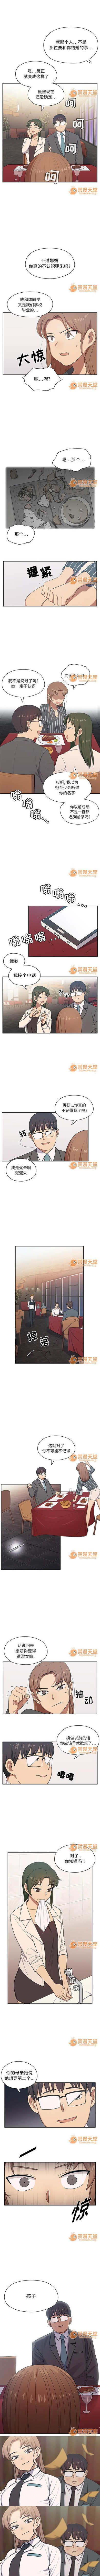 Point Of View 罪與罰 1-41 Trannies - Page 3